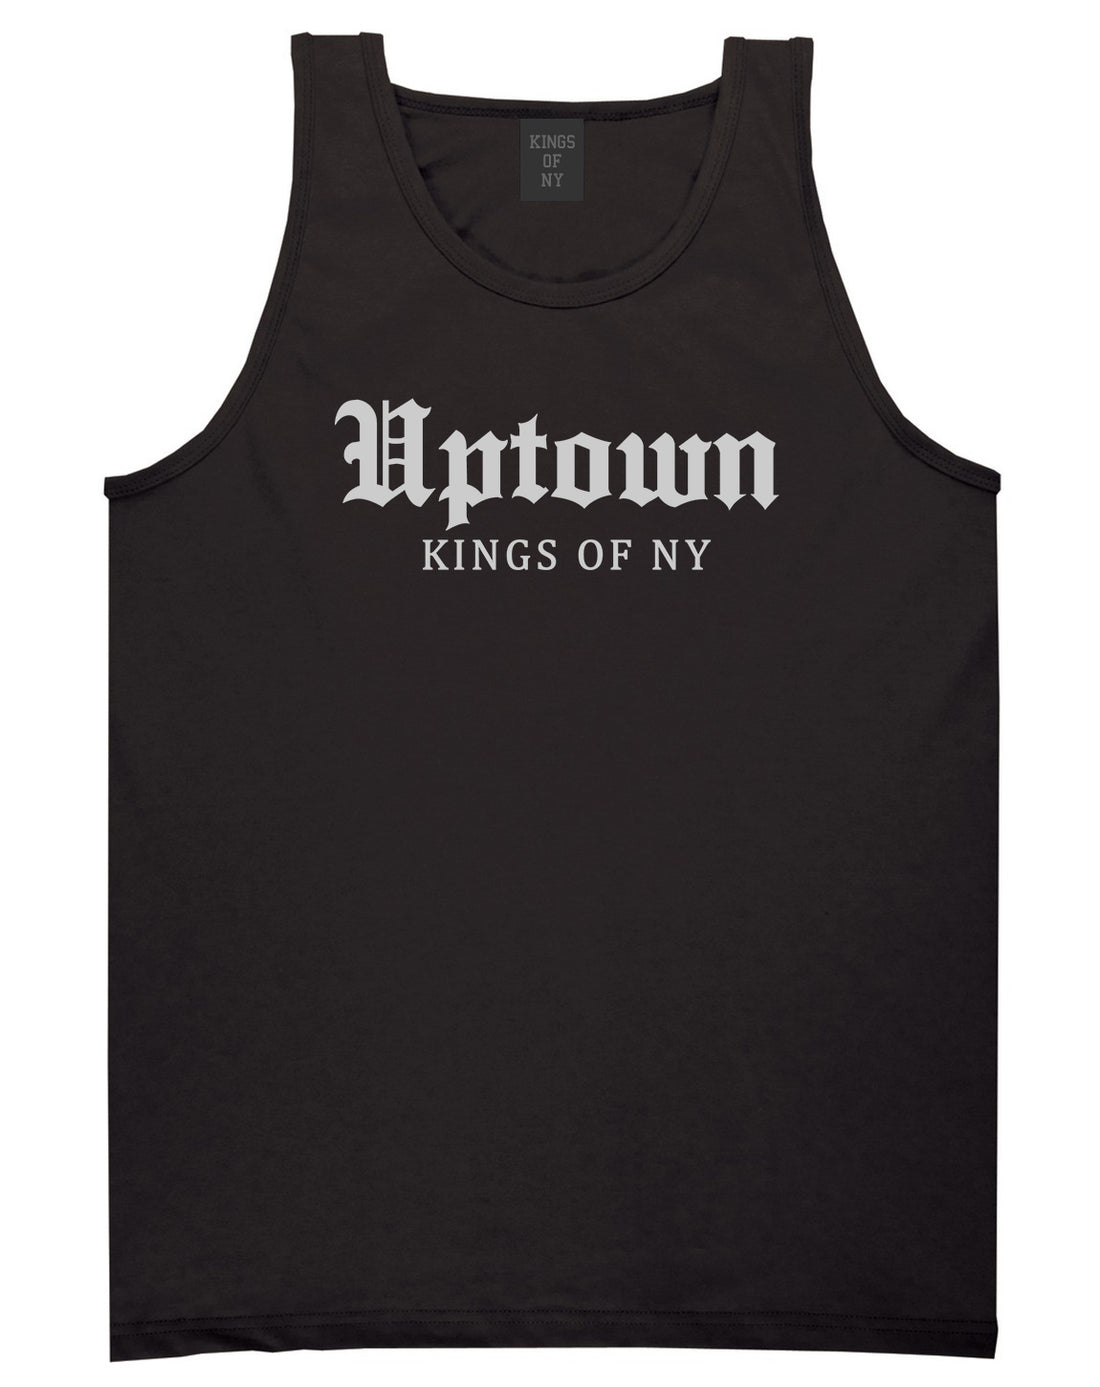 Uptown Old English Mens Tank Top Shirt Black by Kings Of NY